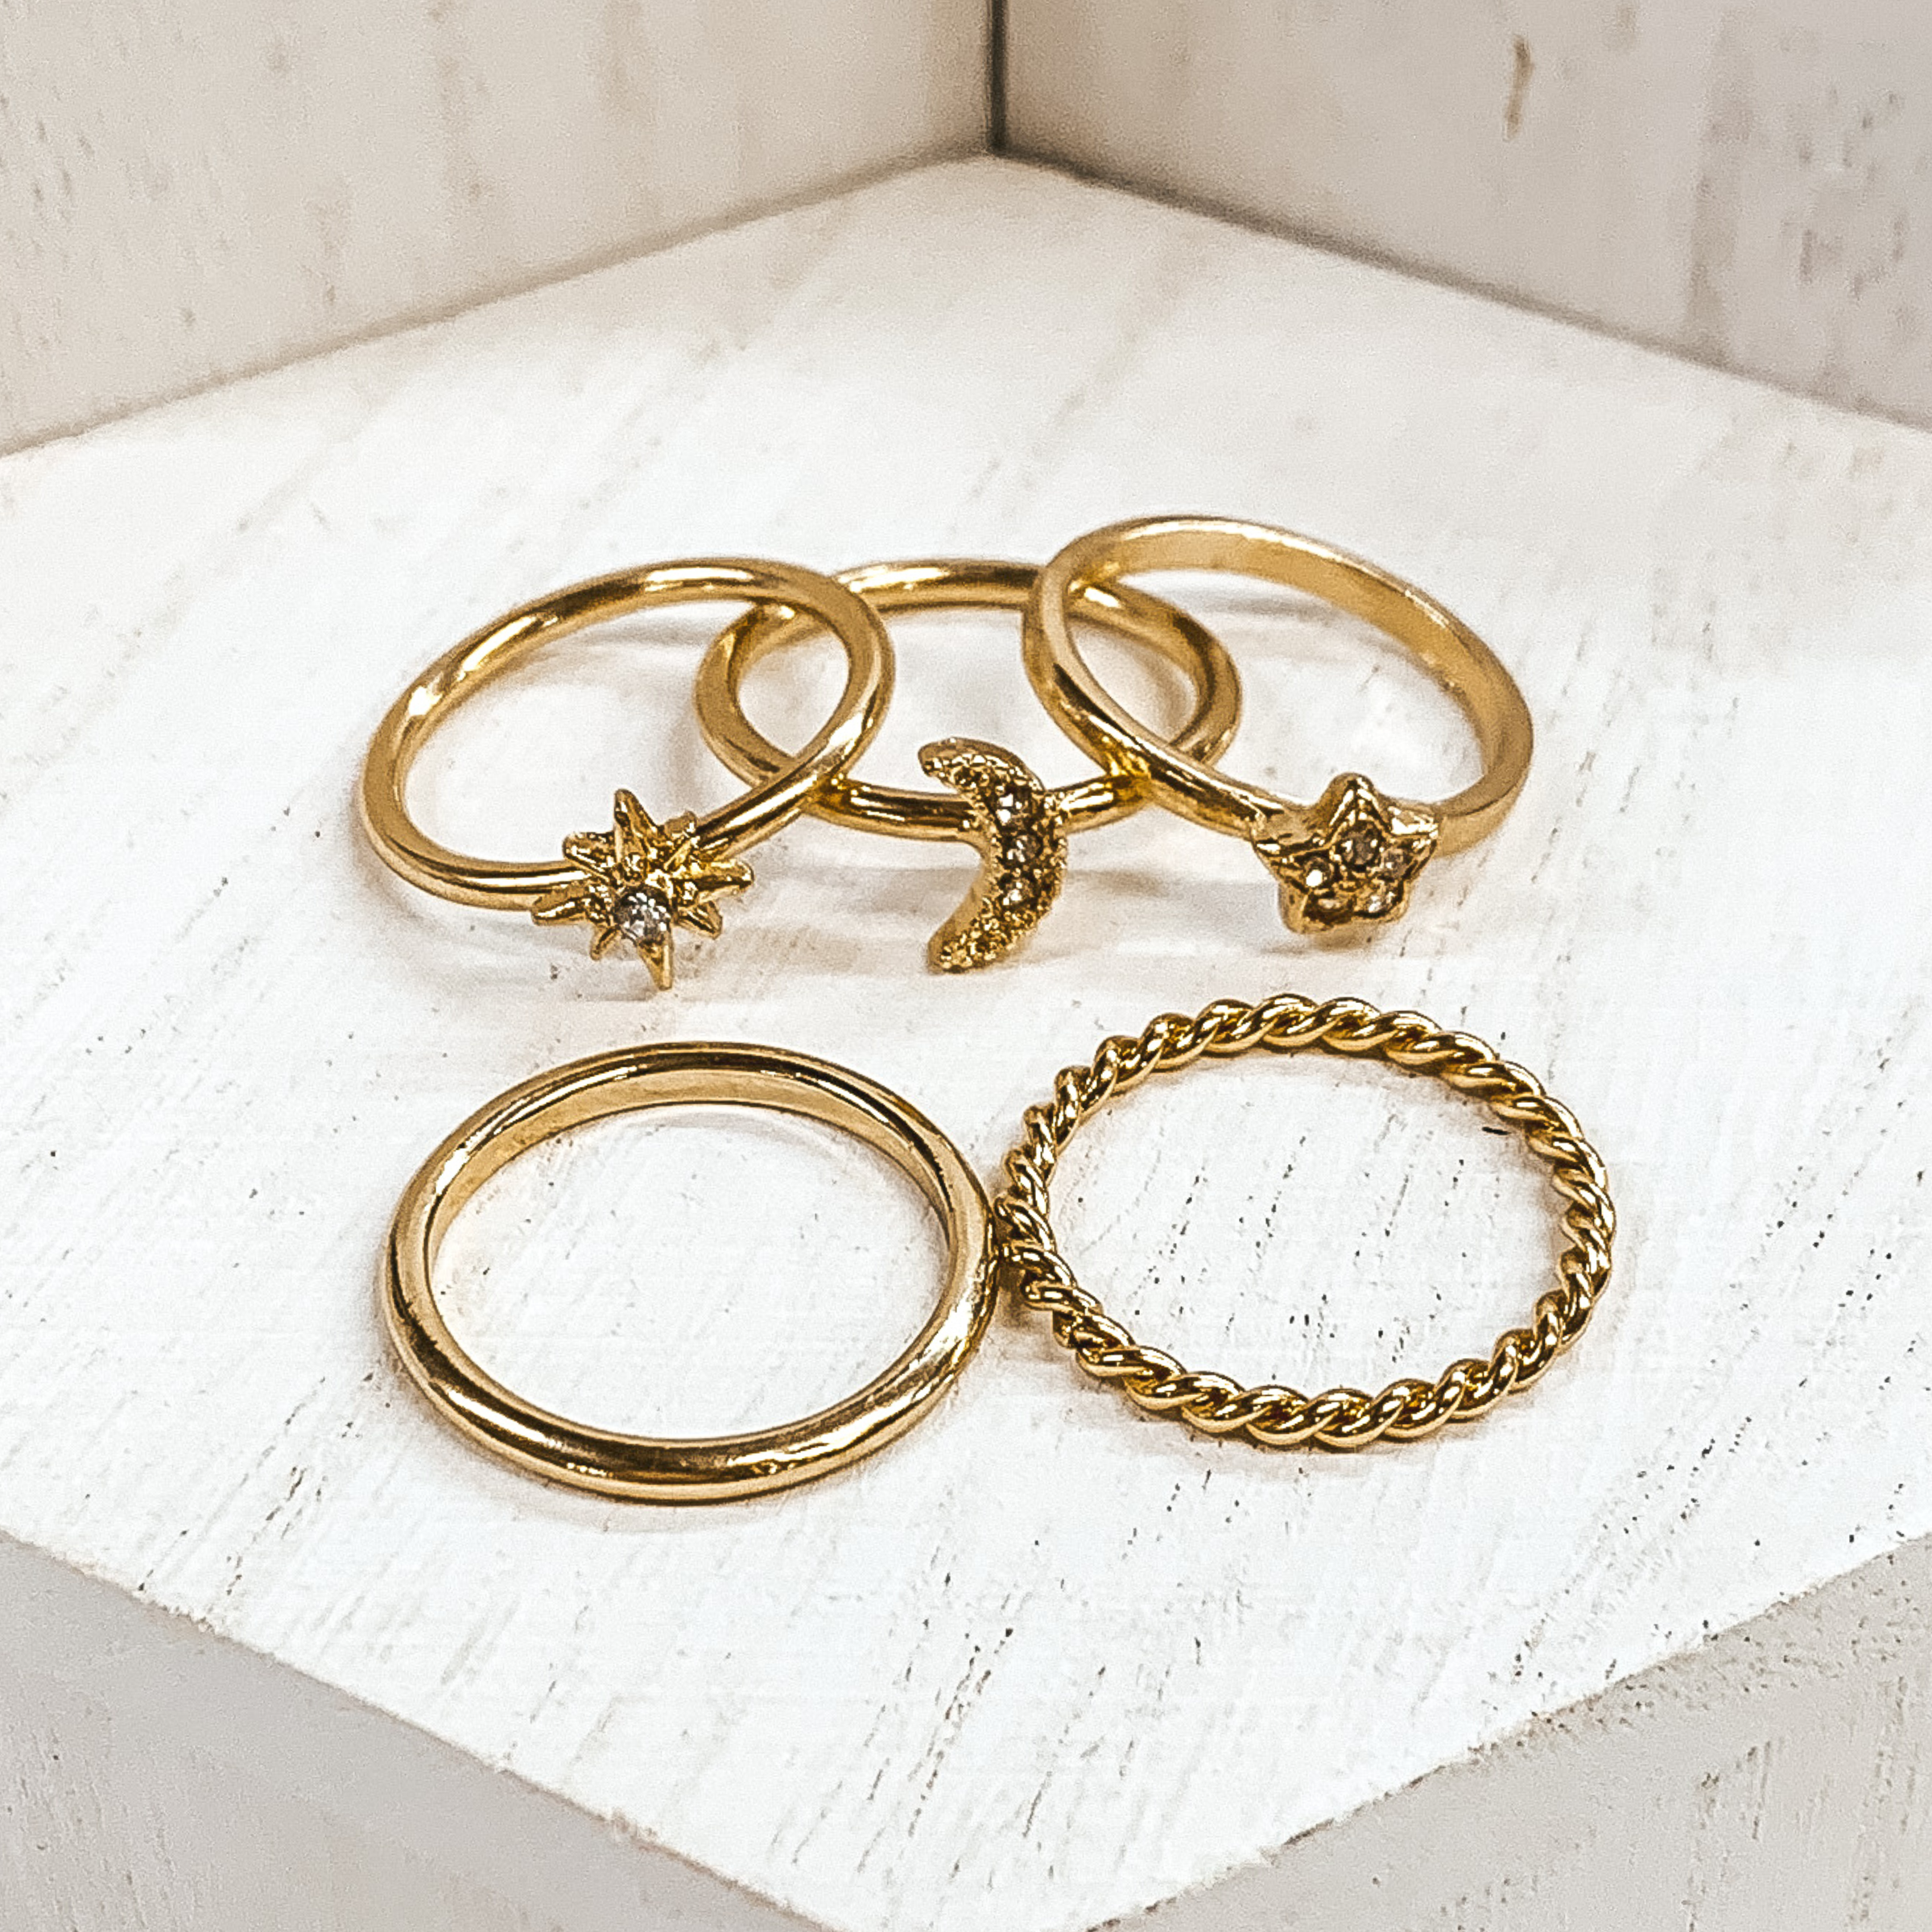 Set of five gold rings. One is a plain band and another is a twisted band.  Two rings have different star pendants, and the last ring has a moon pendant. These rings are pictured on white blocks. 